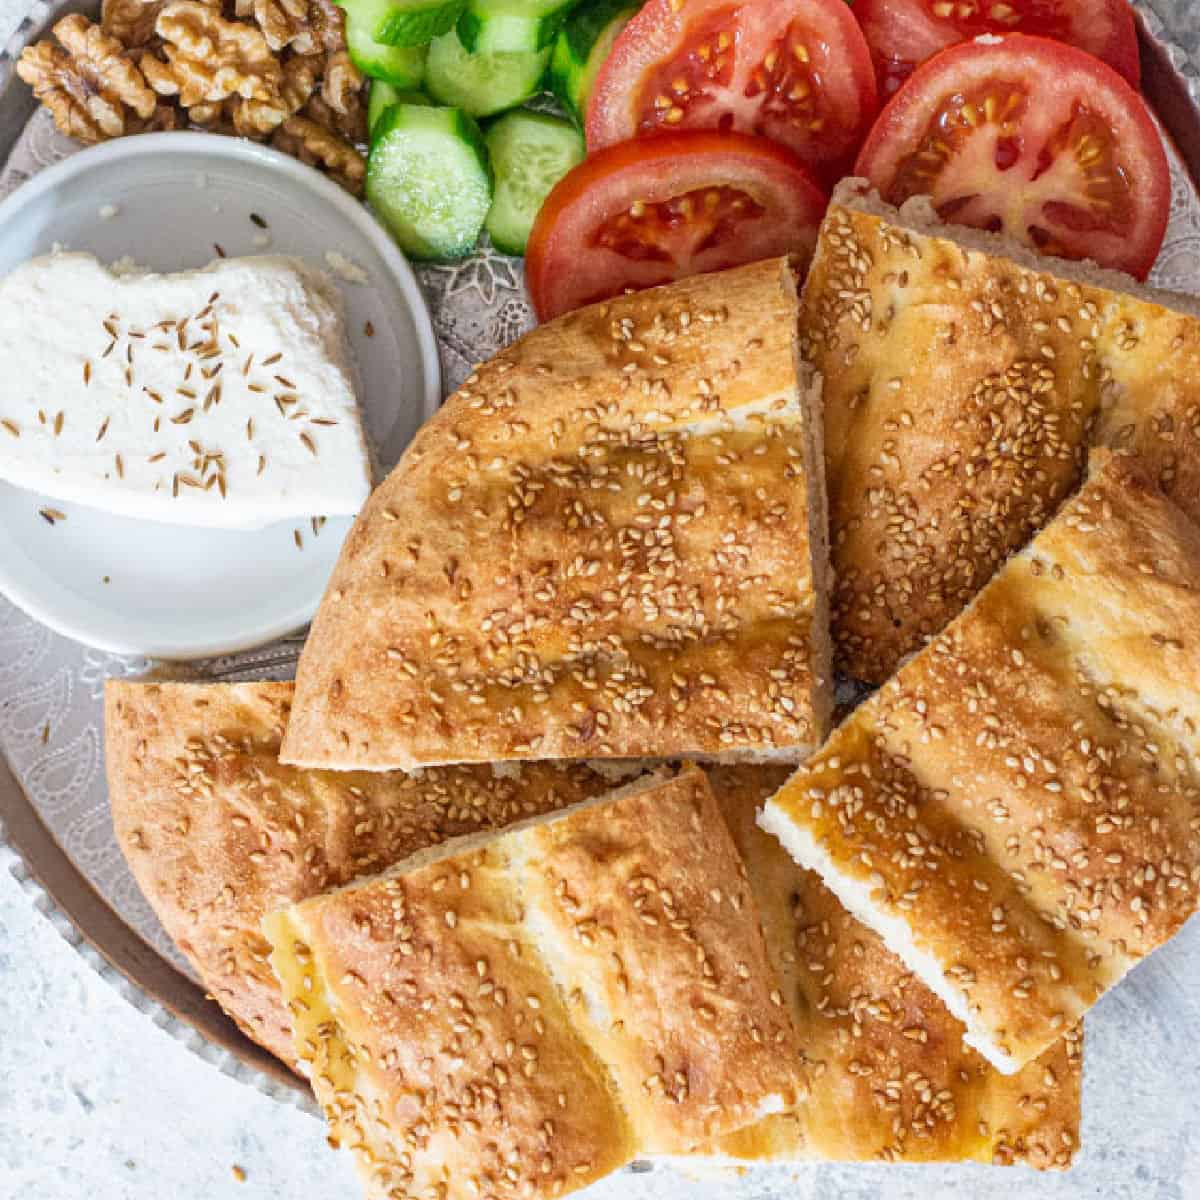 Nan barbari is a classic Persian bread that’s easy to make. With a nice crust and soft inside, this recipe results in a tasty homemade bread suitable for breakfast, lunch or dinner! 
